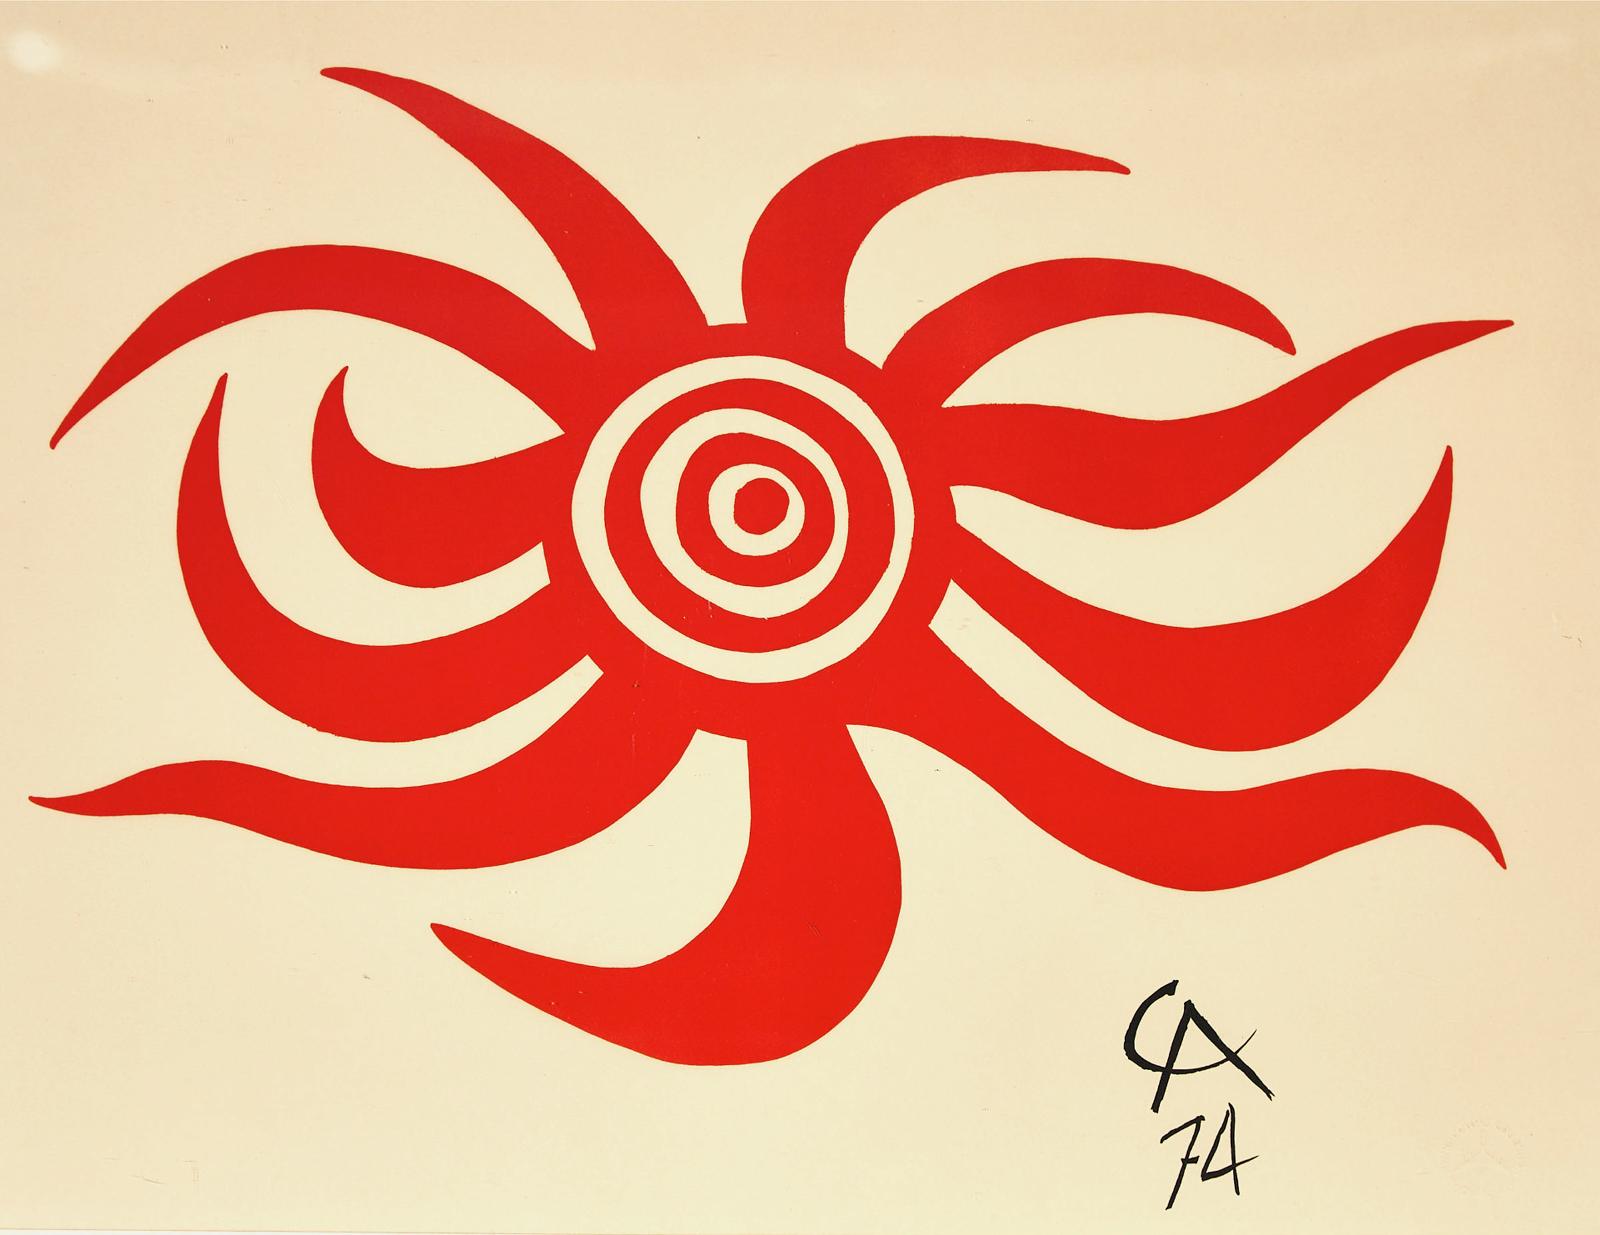 Alexander Calder (1898-1976) - Sunburst (From The Flying Colors Collection) (One From The Set Of 6), 1974